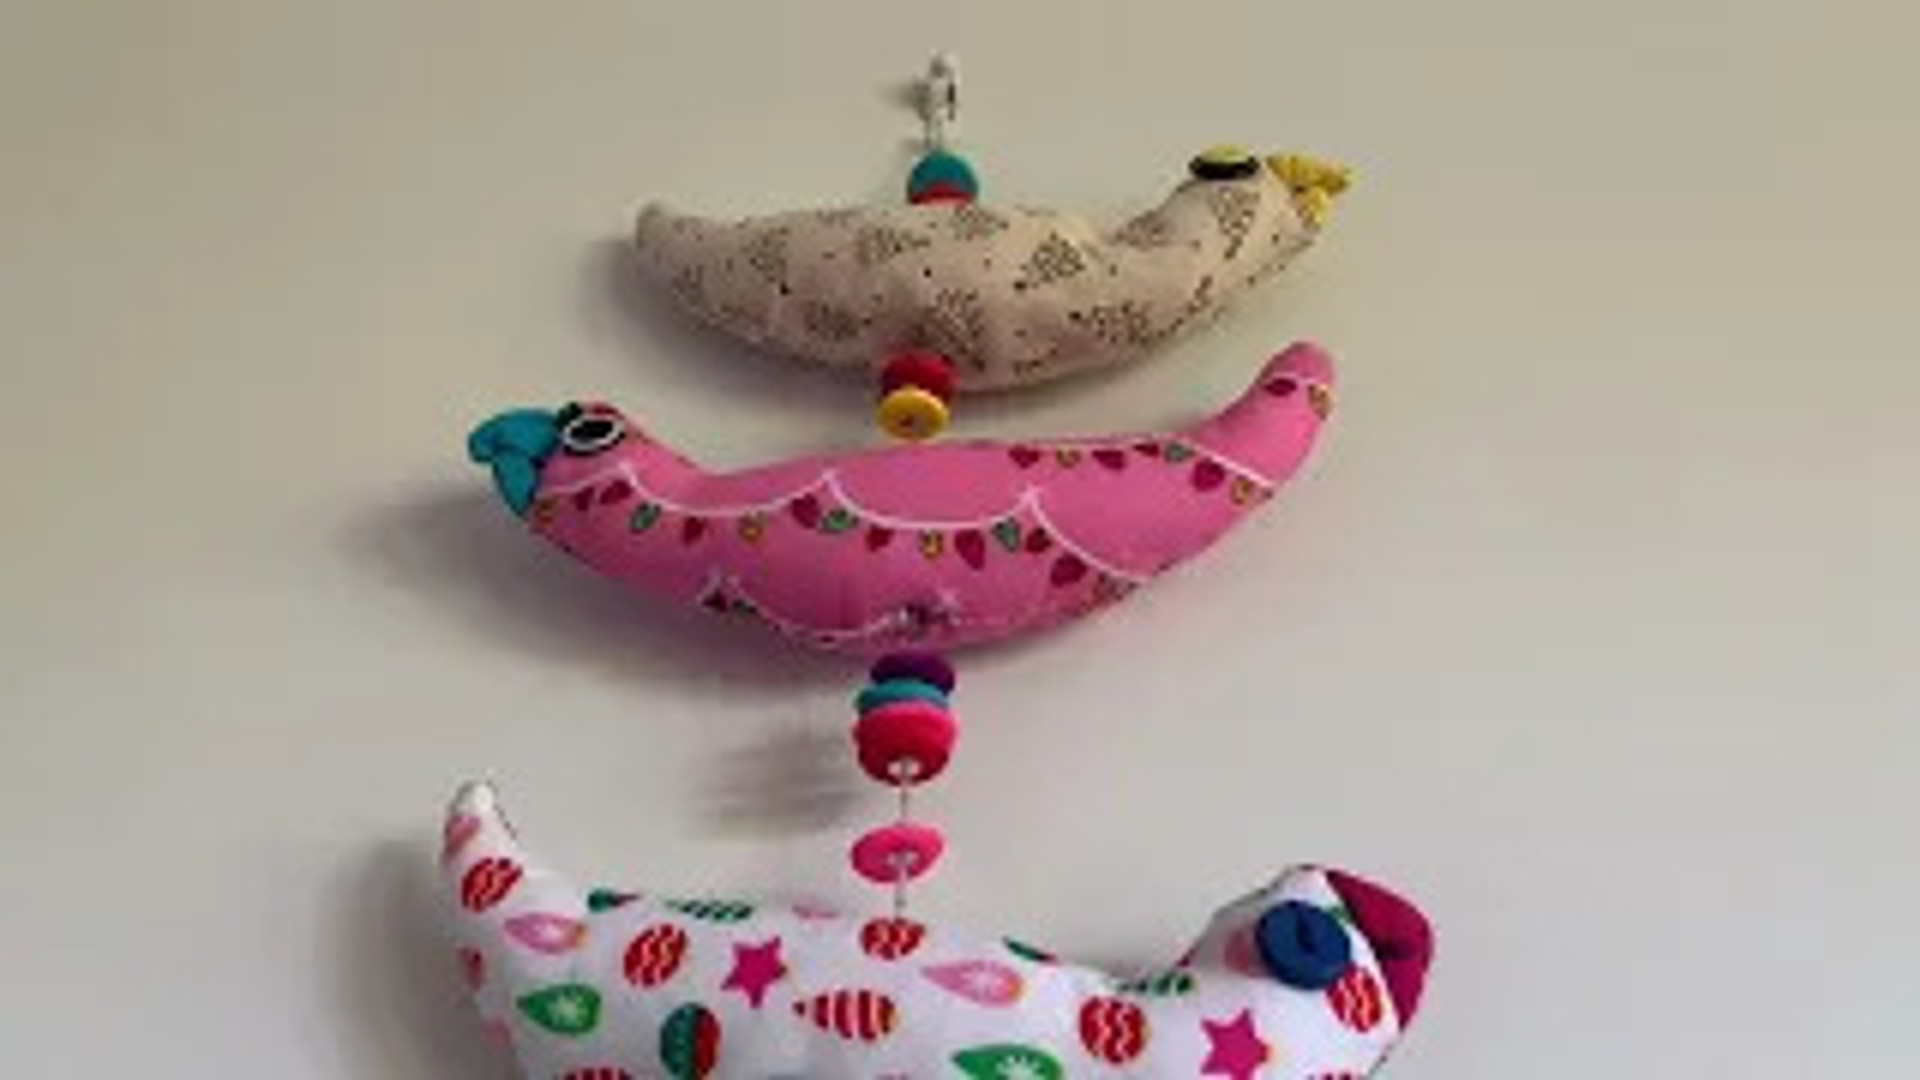 "From Fabric to Flight: Creating a DIY Quirky Bird Mobile with Singer"